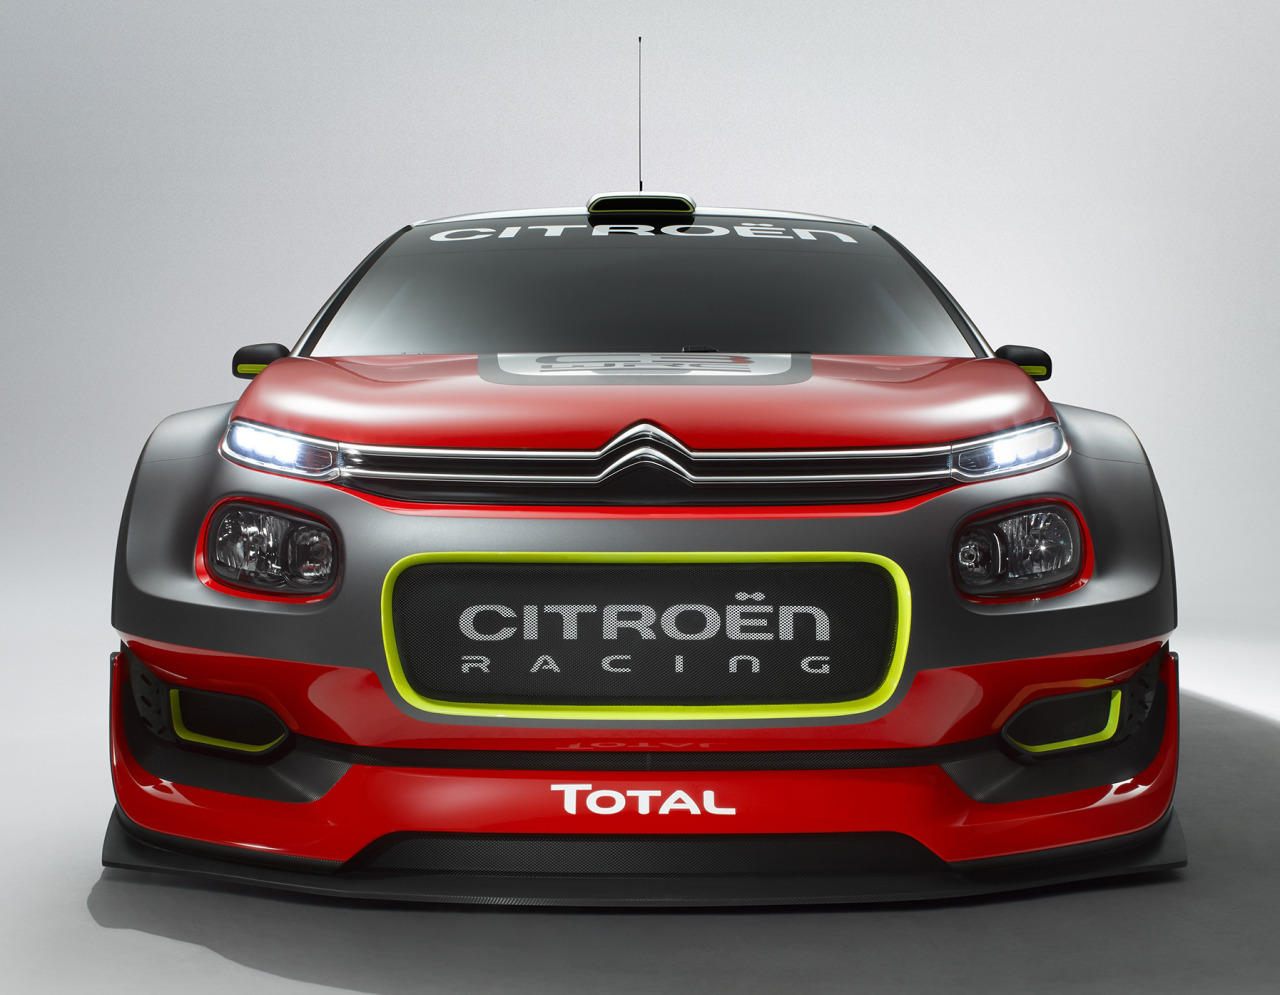 carsthatnevermadeitetc:  Citroën C3 WRC Concept Car, 2017. Designed by the Citroën